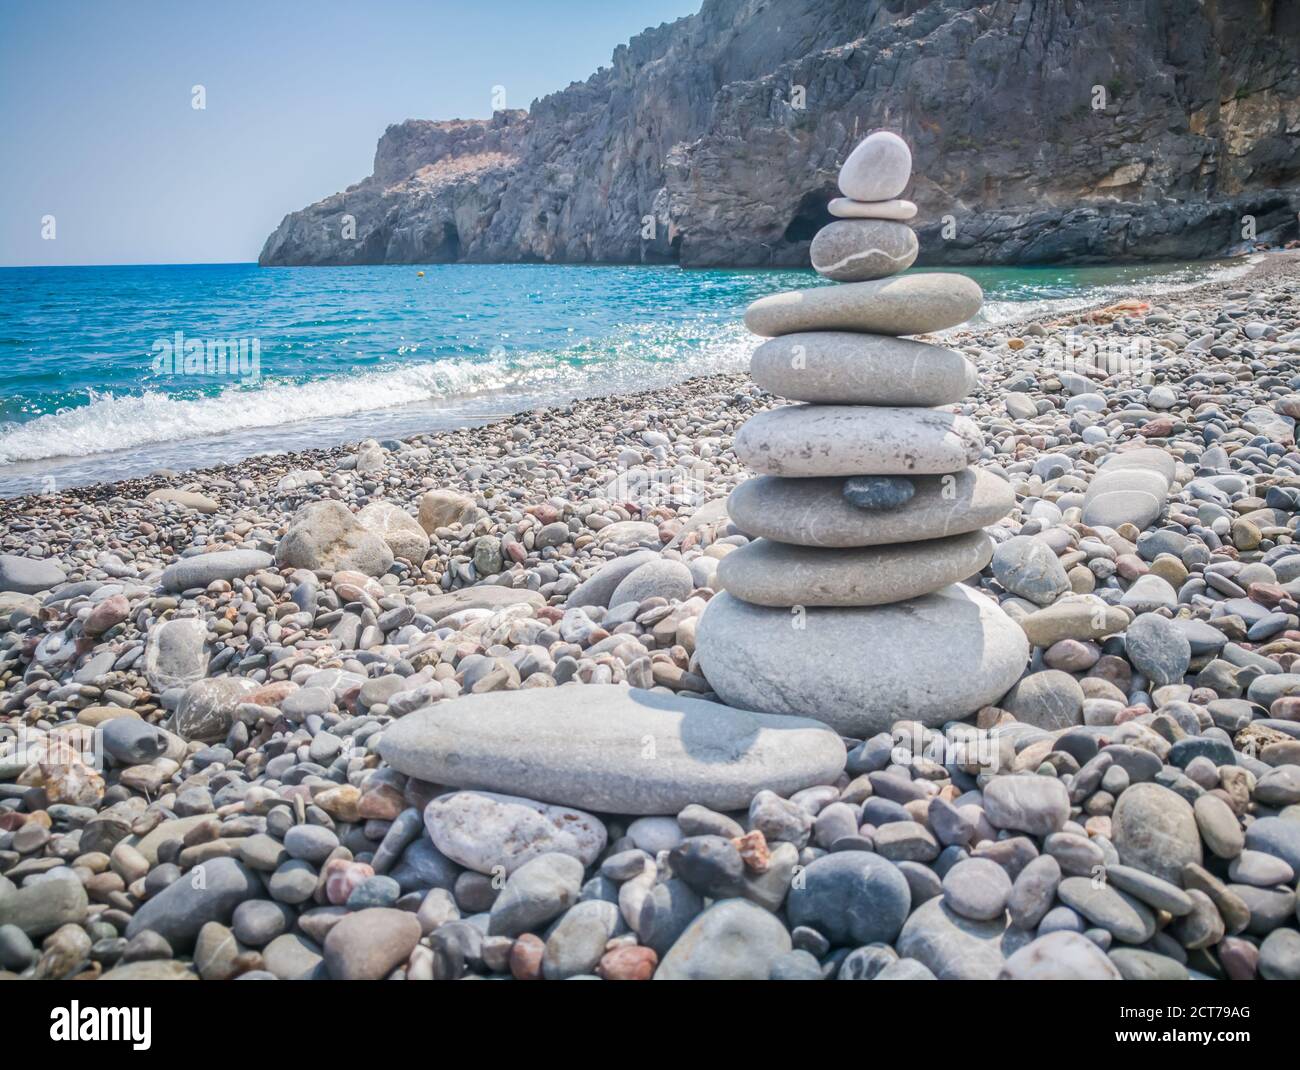 Symbolic scales of stones against the background of the sea and blue sky. Concept of harmony and balance. Pros and cons concept. Copy space for text. Stock Photo